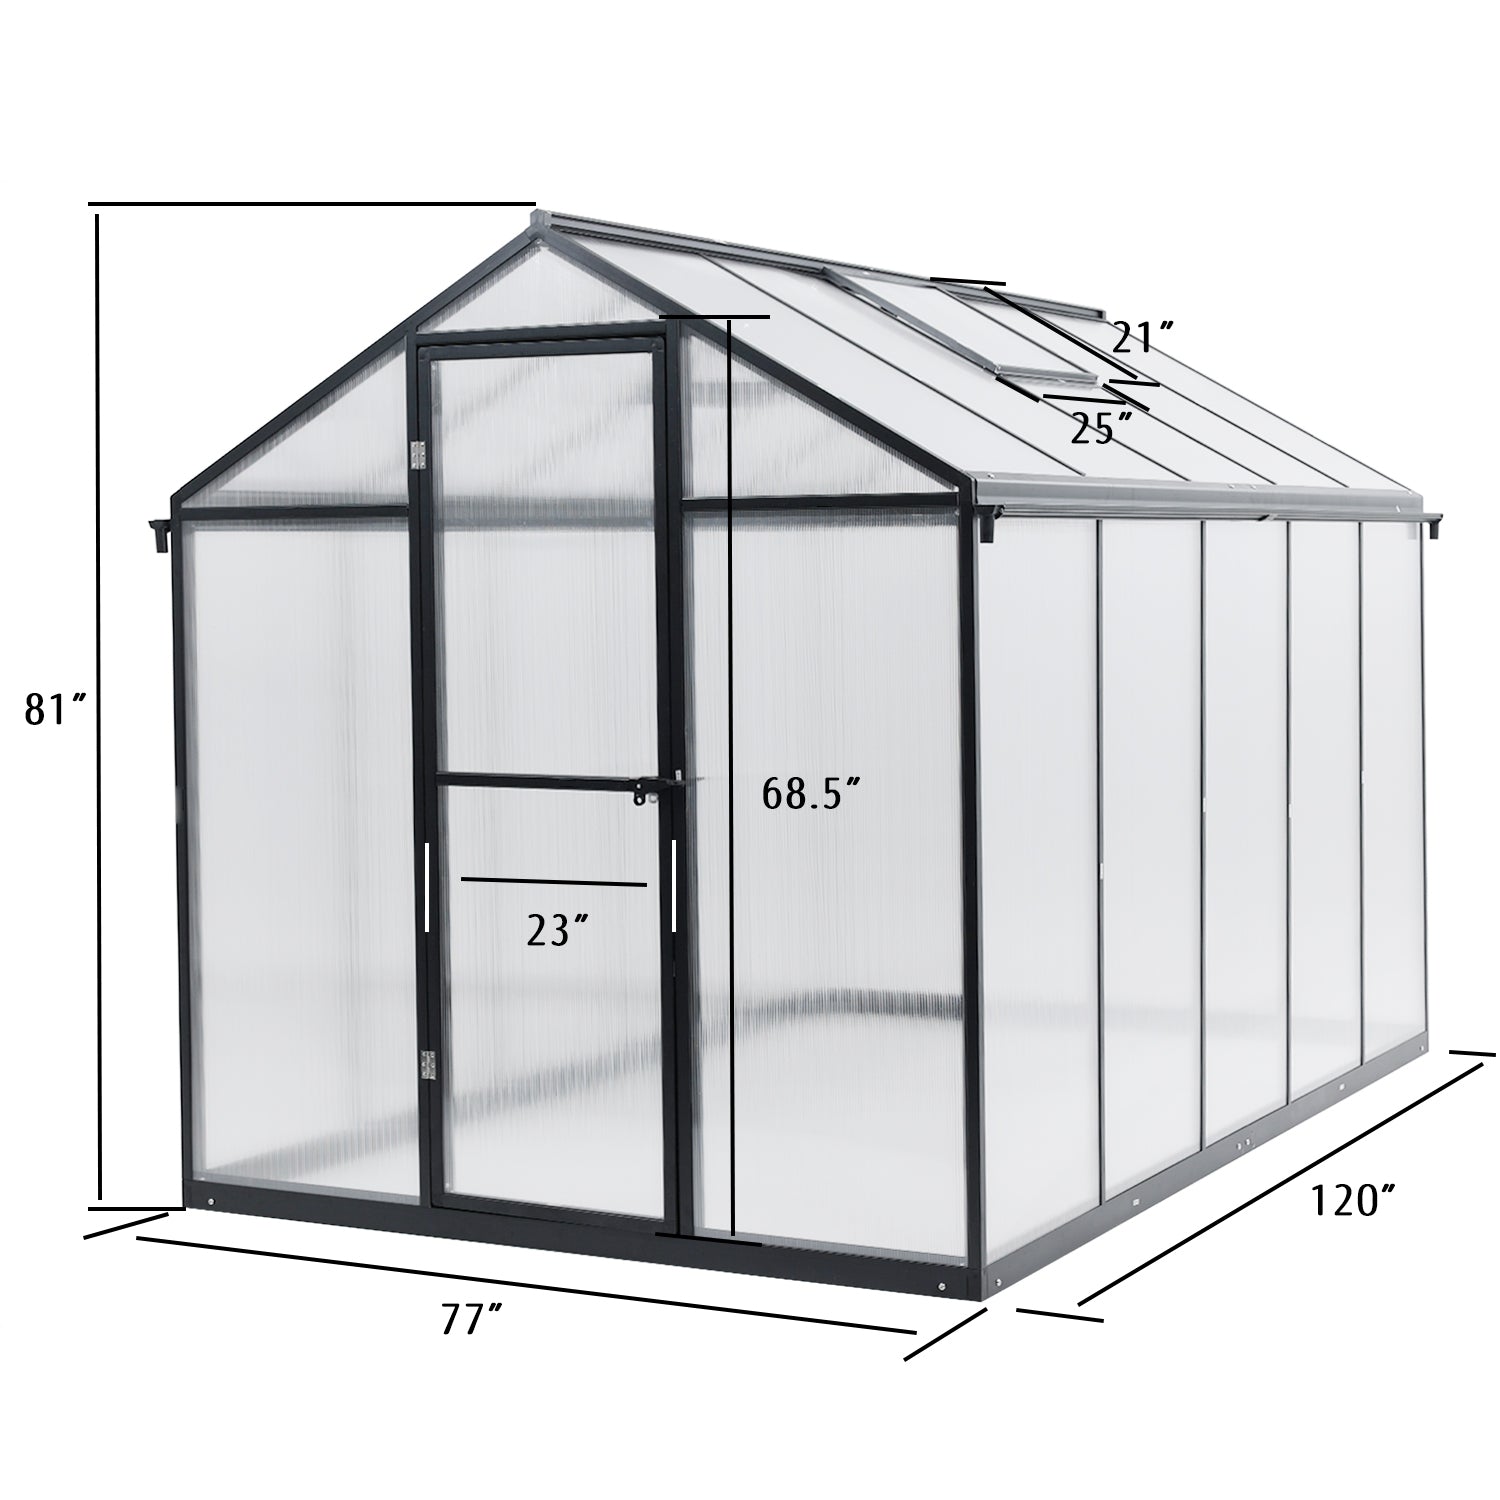 6' x 8' /6' x 10' Walk-in Polycarbonate Greenhouse with Roof Vent and Door lock,  Aluminum Frame and Polycarbonate Panels- White/Black  Aoodor LLC   